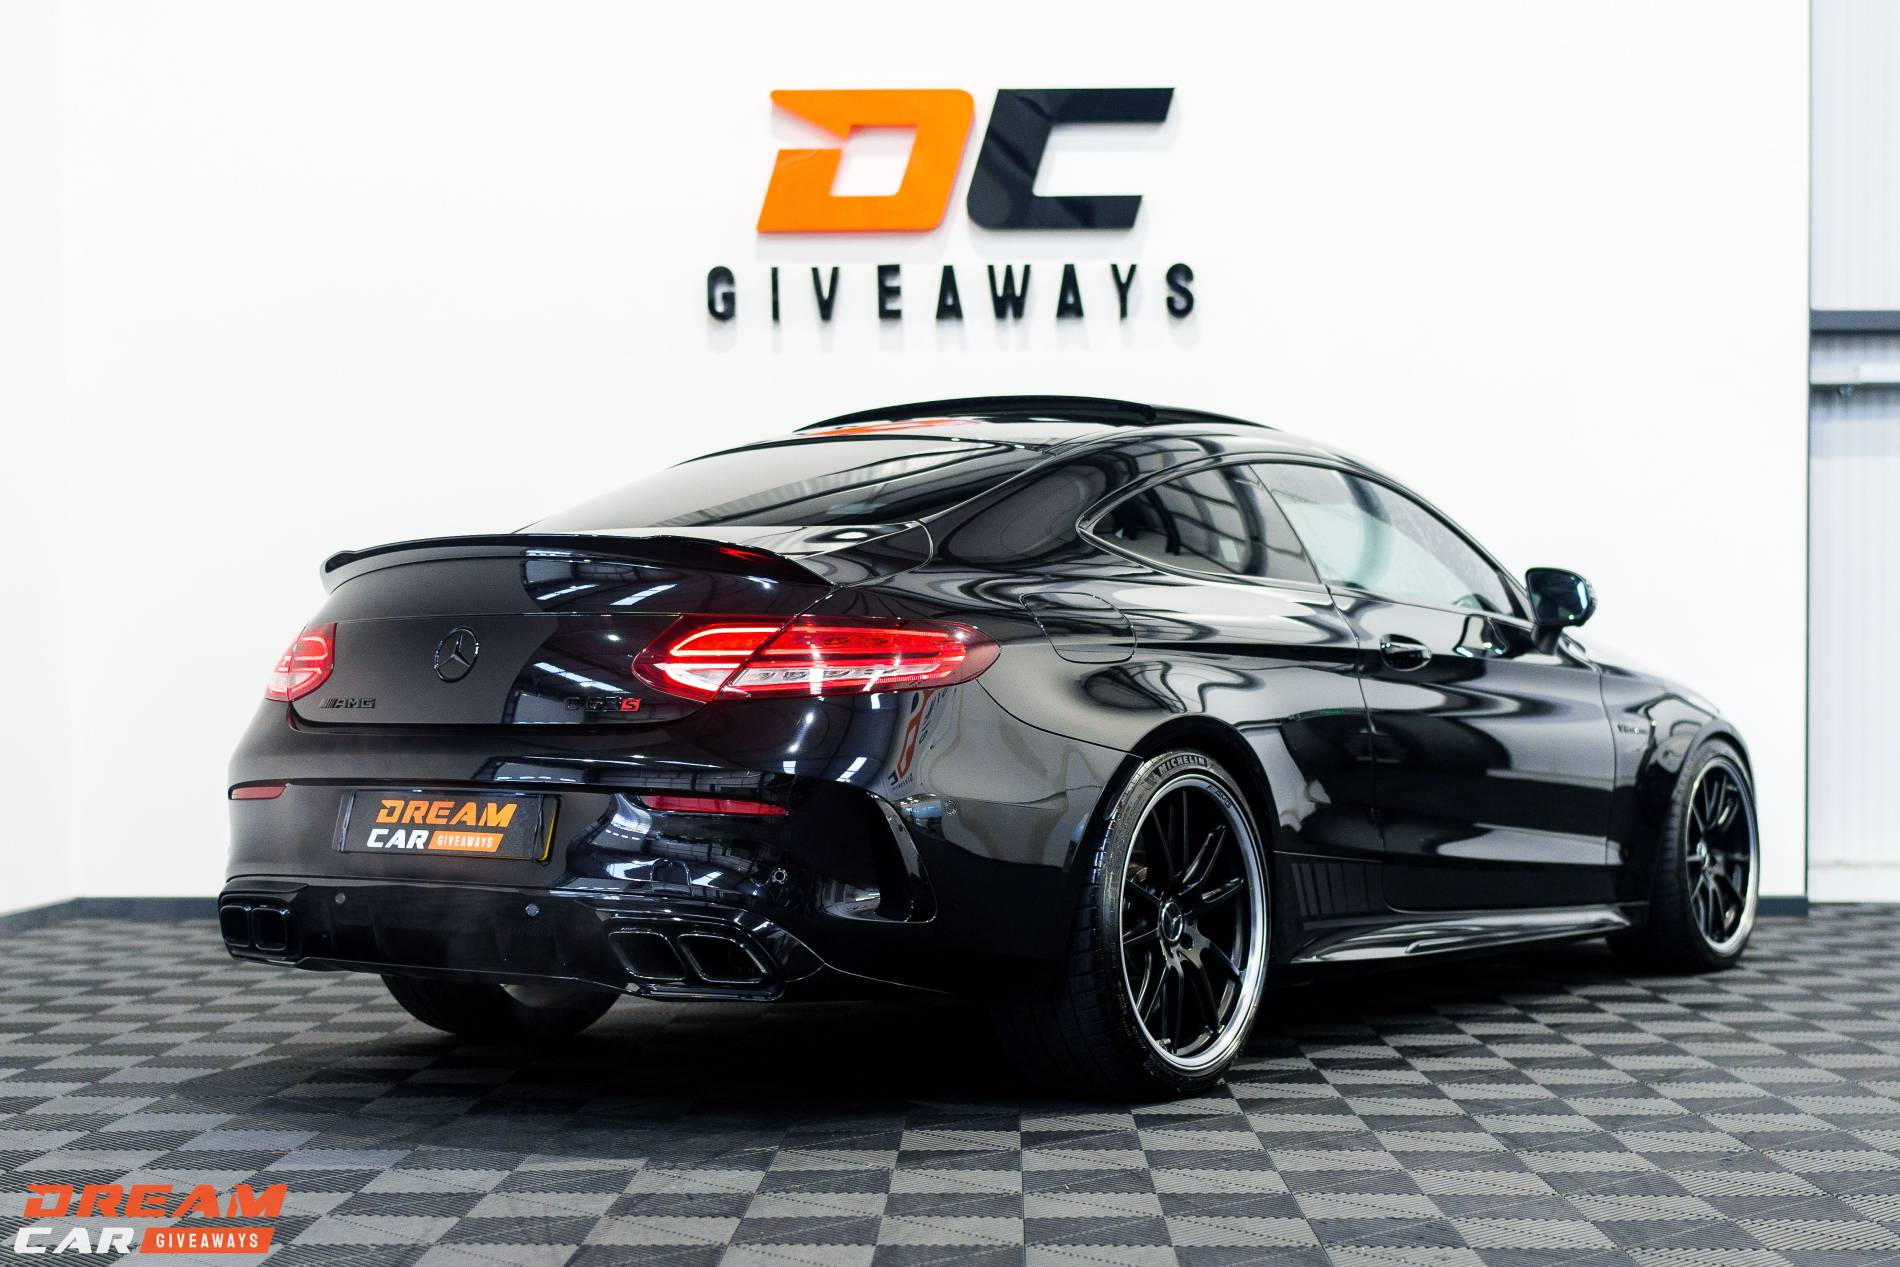 Win this 2019 Mercedes-Benz C63S AMG & £2,000 or £45,000 Tax Free